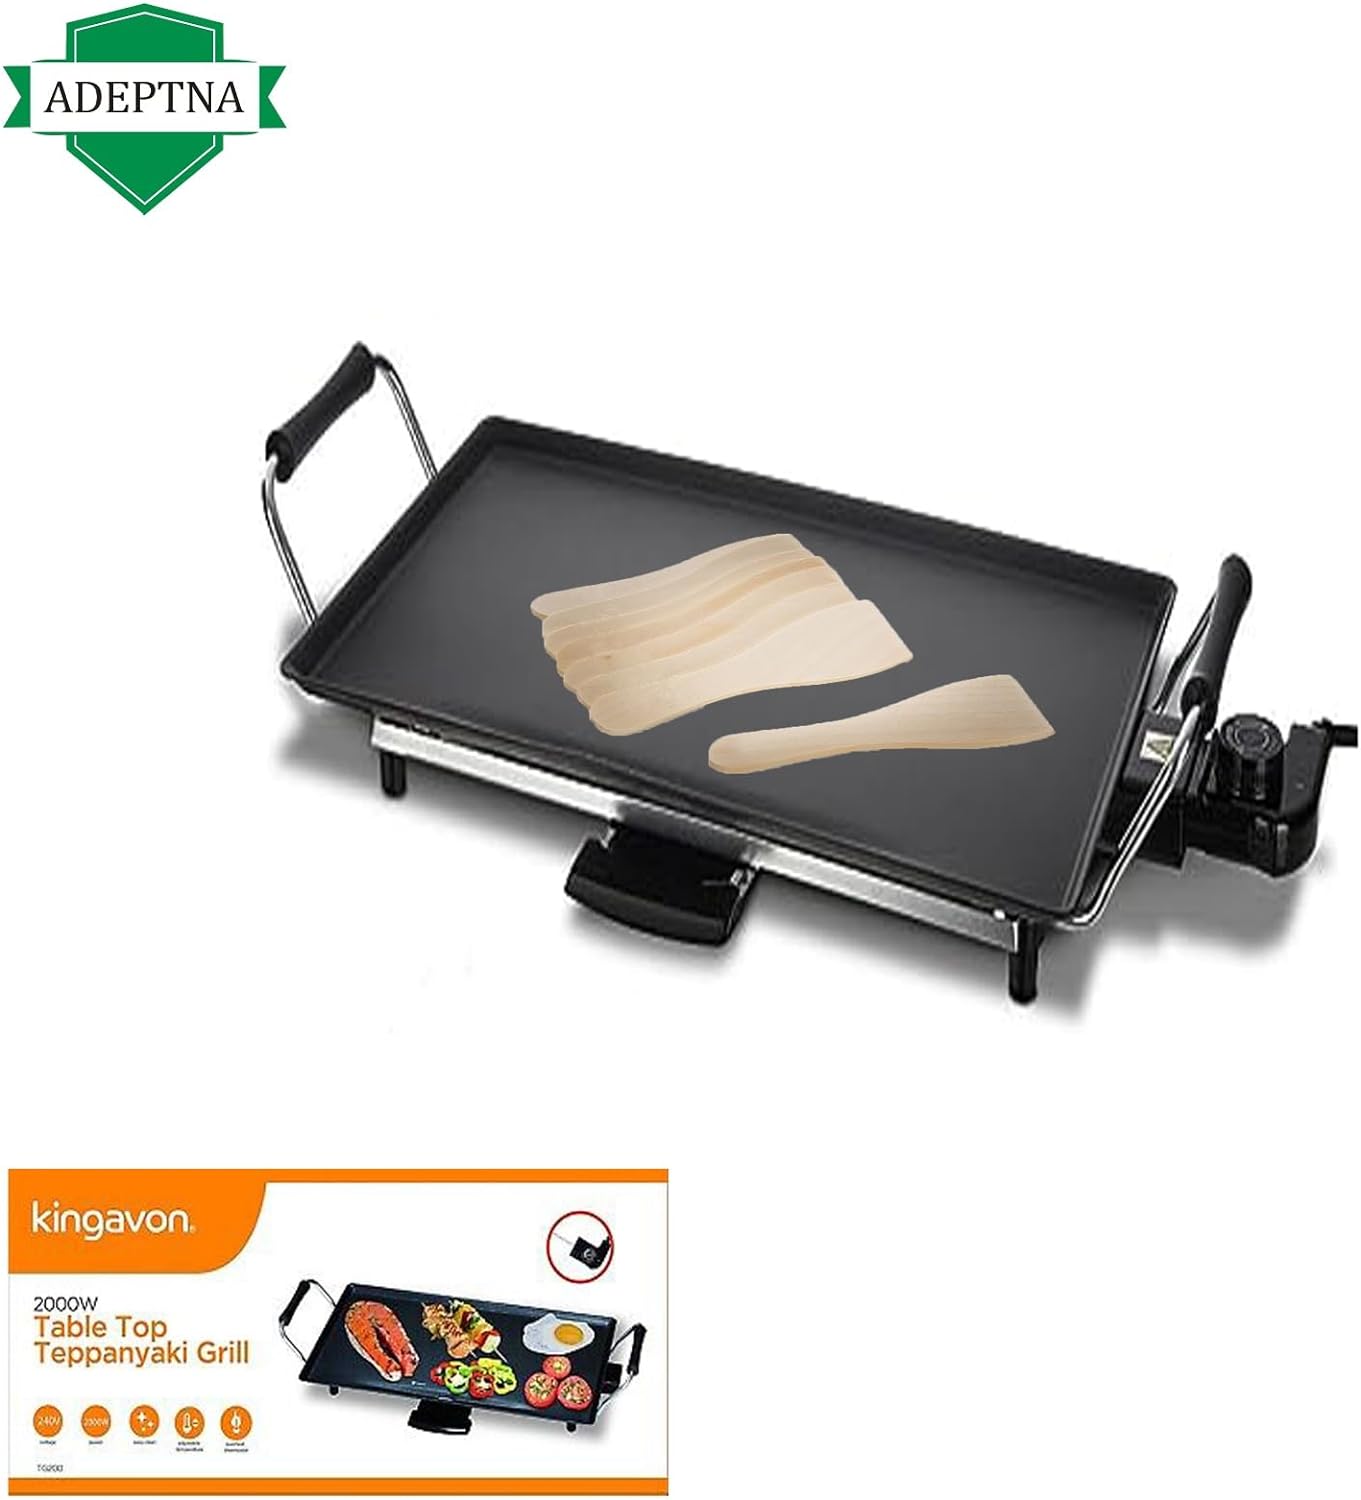 ADEPTNA Electric Teppanyaki Table Top Grill Griddle BBQ Barbecue 2000W with 8 Spatulas